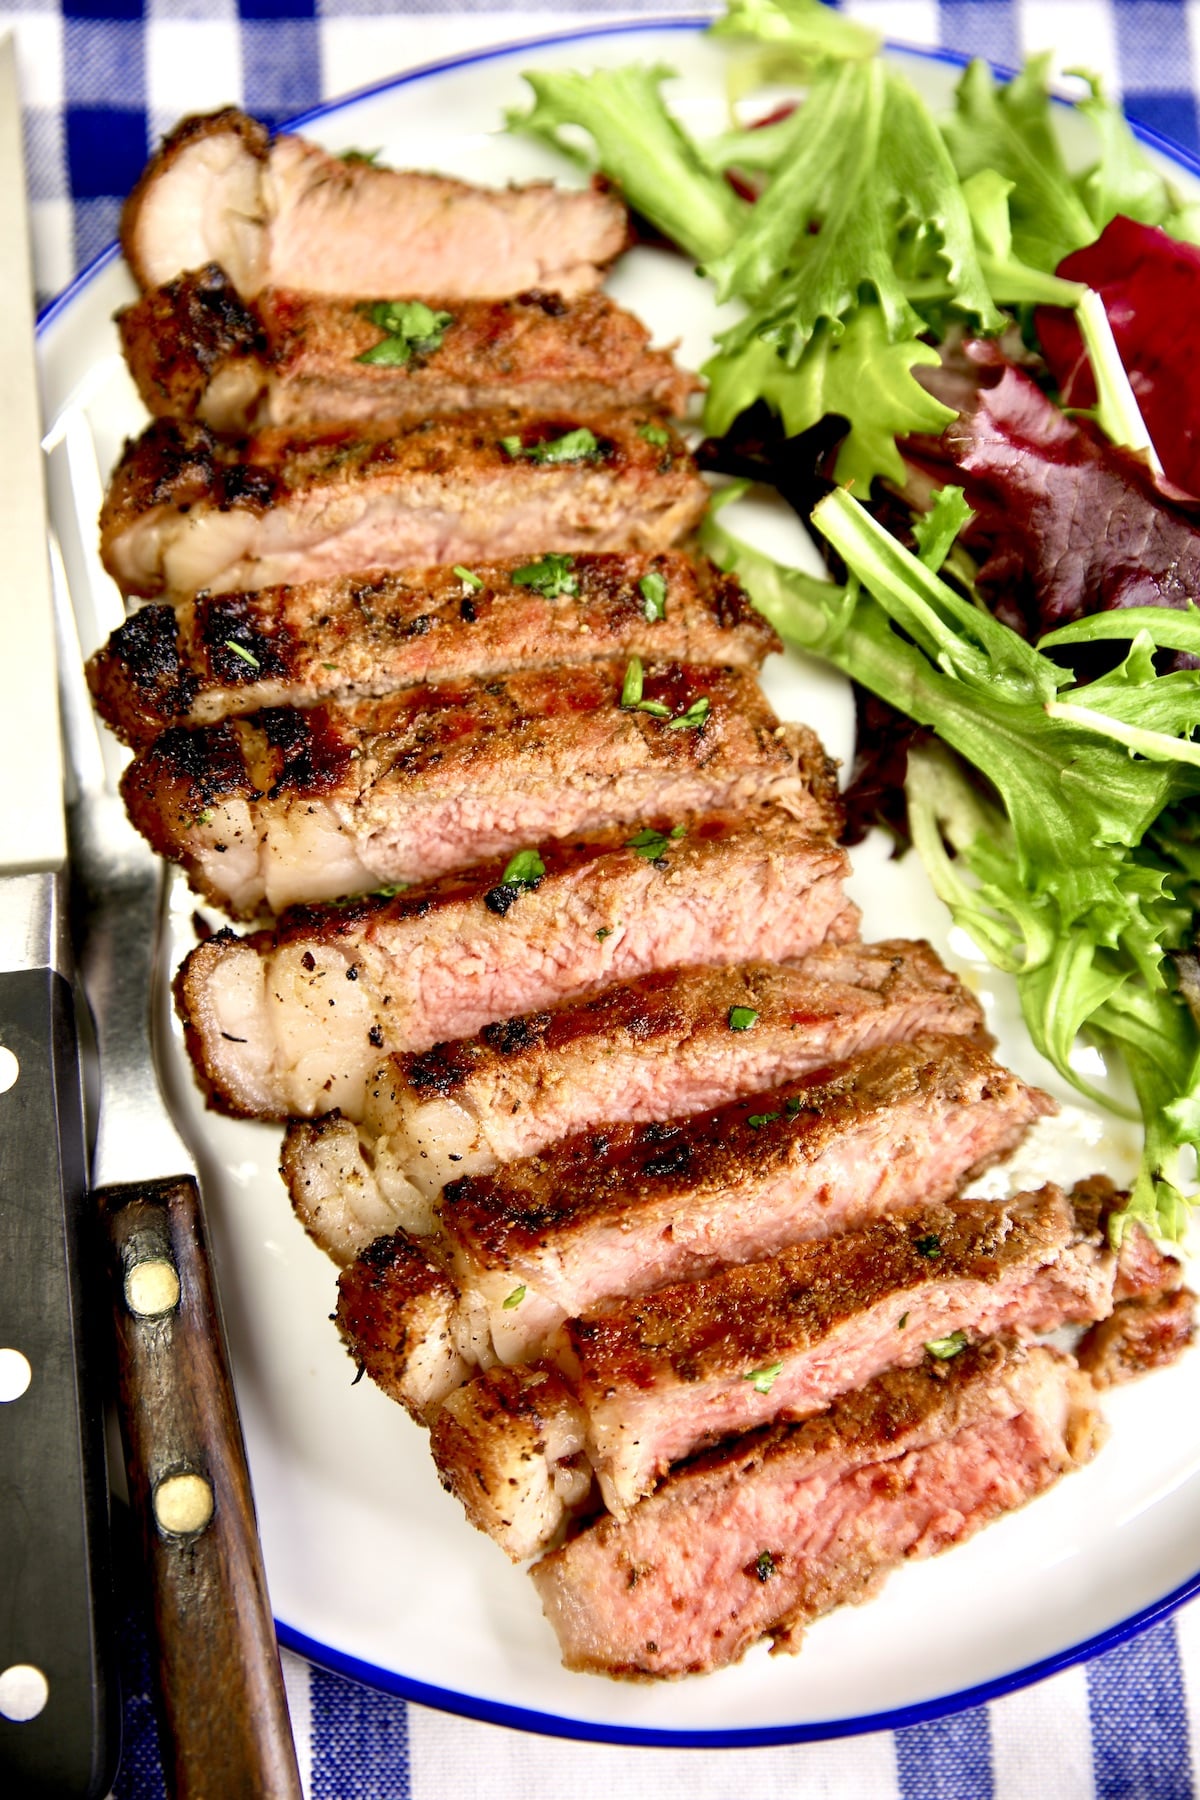 Sliced NY Strip steak on a plate with salad.